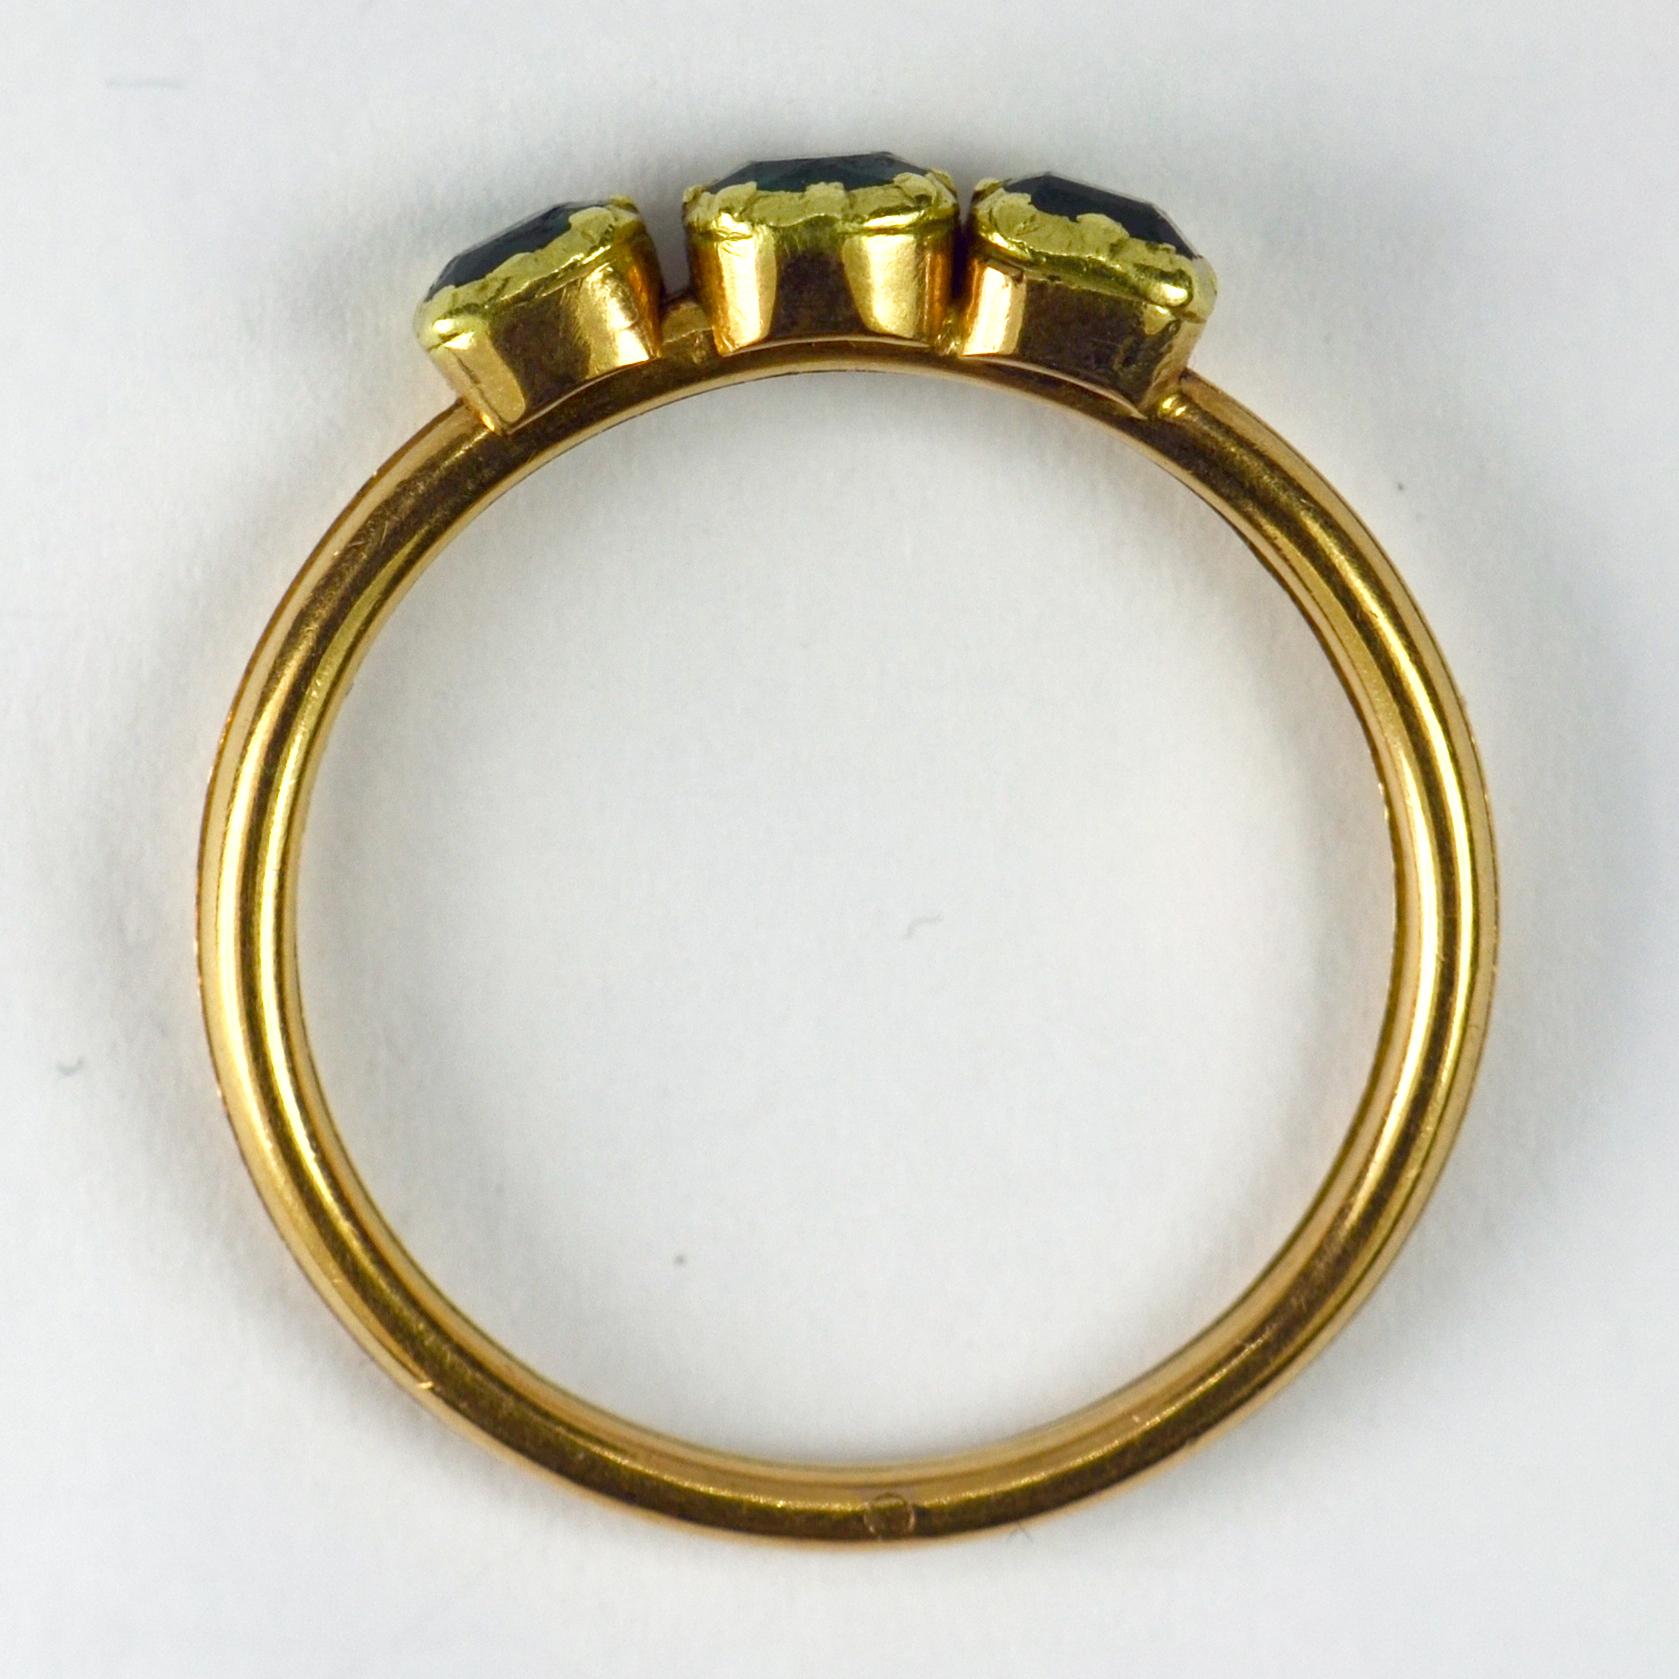 A French 18 karat (18K) yellow gold gimmel or fede ring with three hinged parts, each set with a collet set step cut green emerald. The three emeralds come together to form a trinity set when the ring is closed. Stamped with the eagles mark for 18